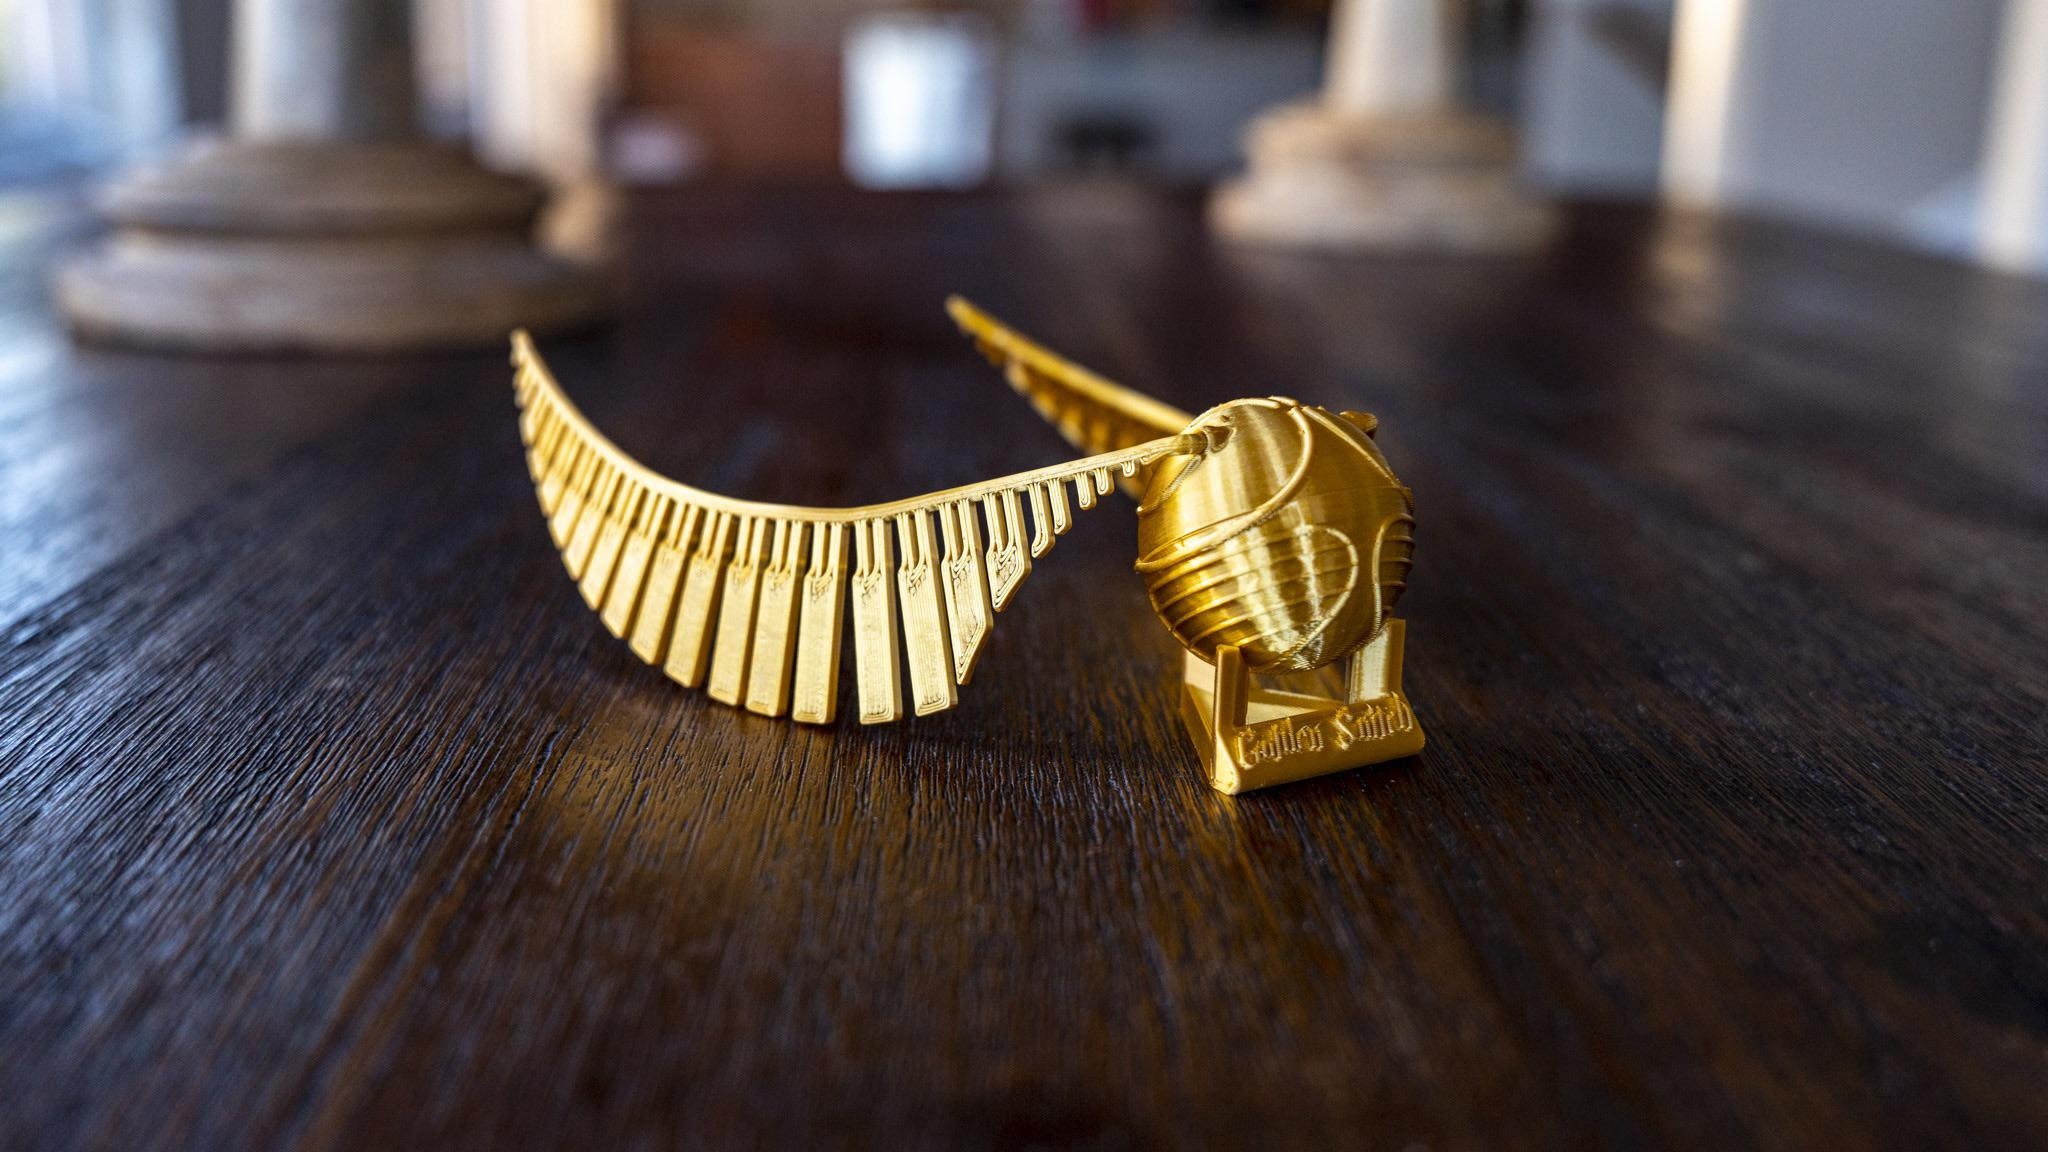 Golden Snitch, Movies, Golden Snitch prop from Harry Potter, 2050x1160 HD Desktop